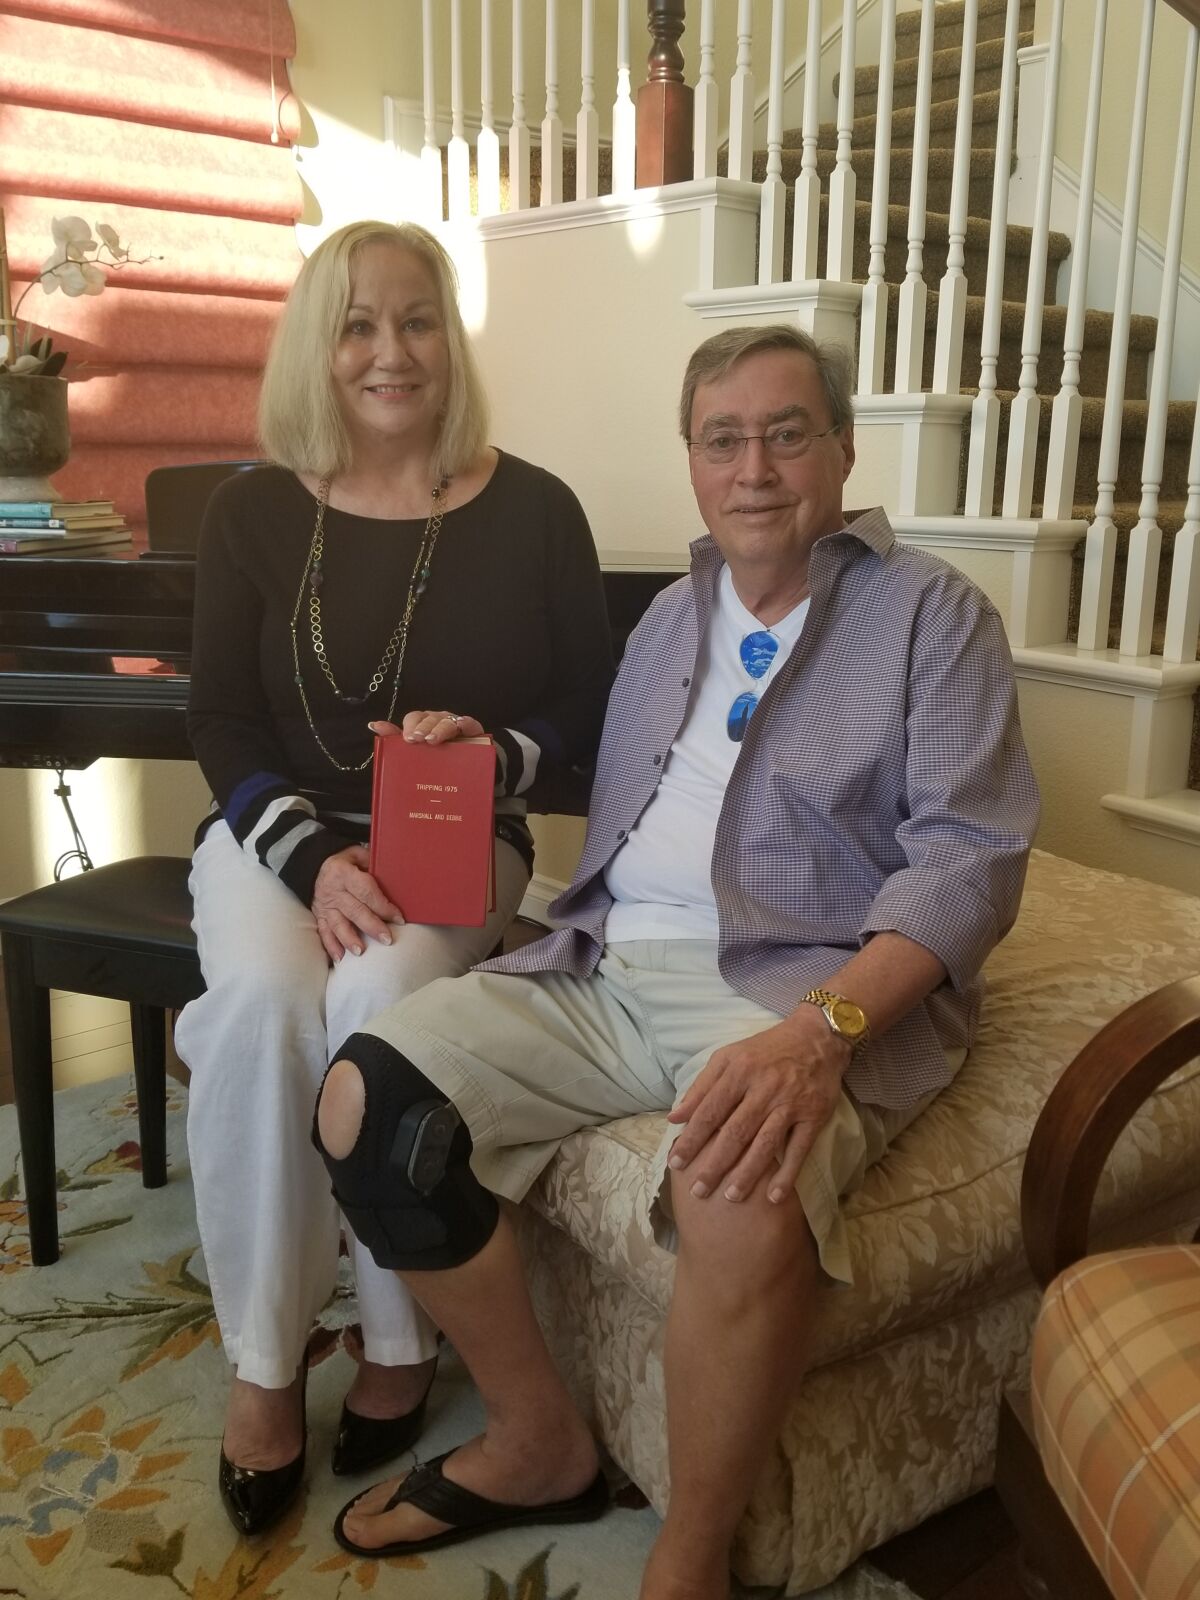 Debbie and Marshall Hockett in their living room in Encinitas, with their original travel journal.